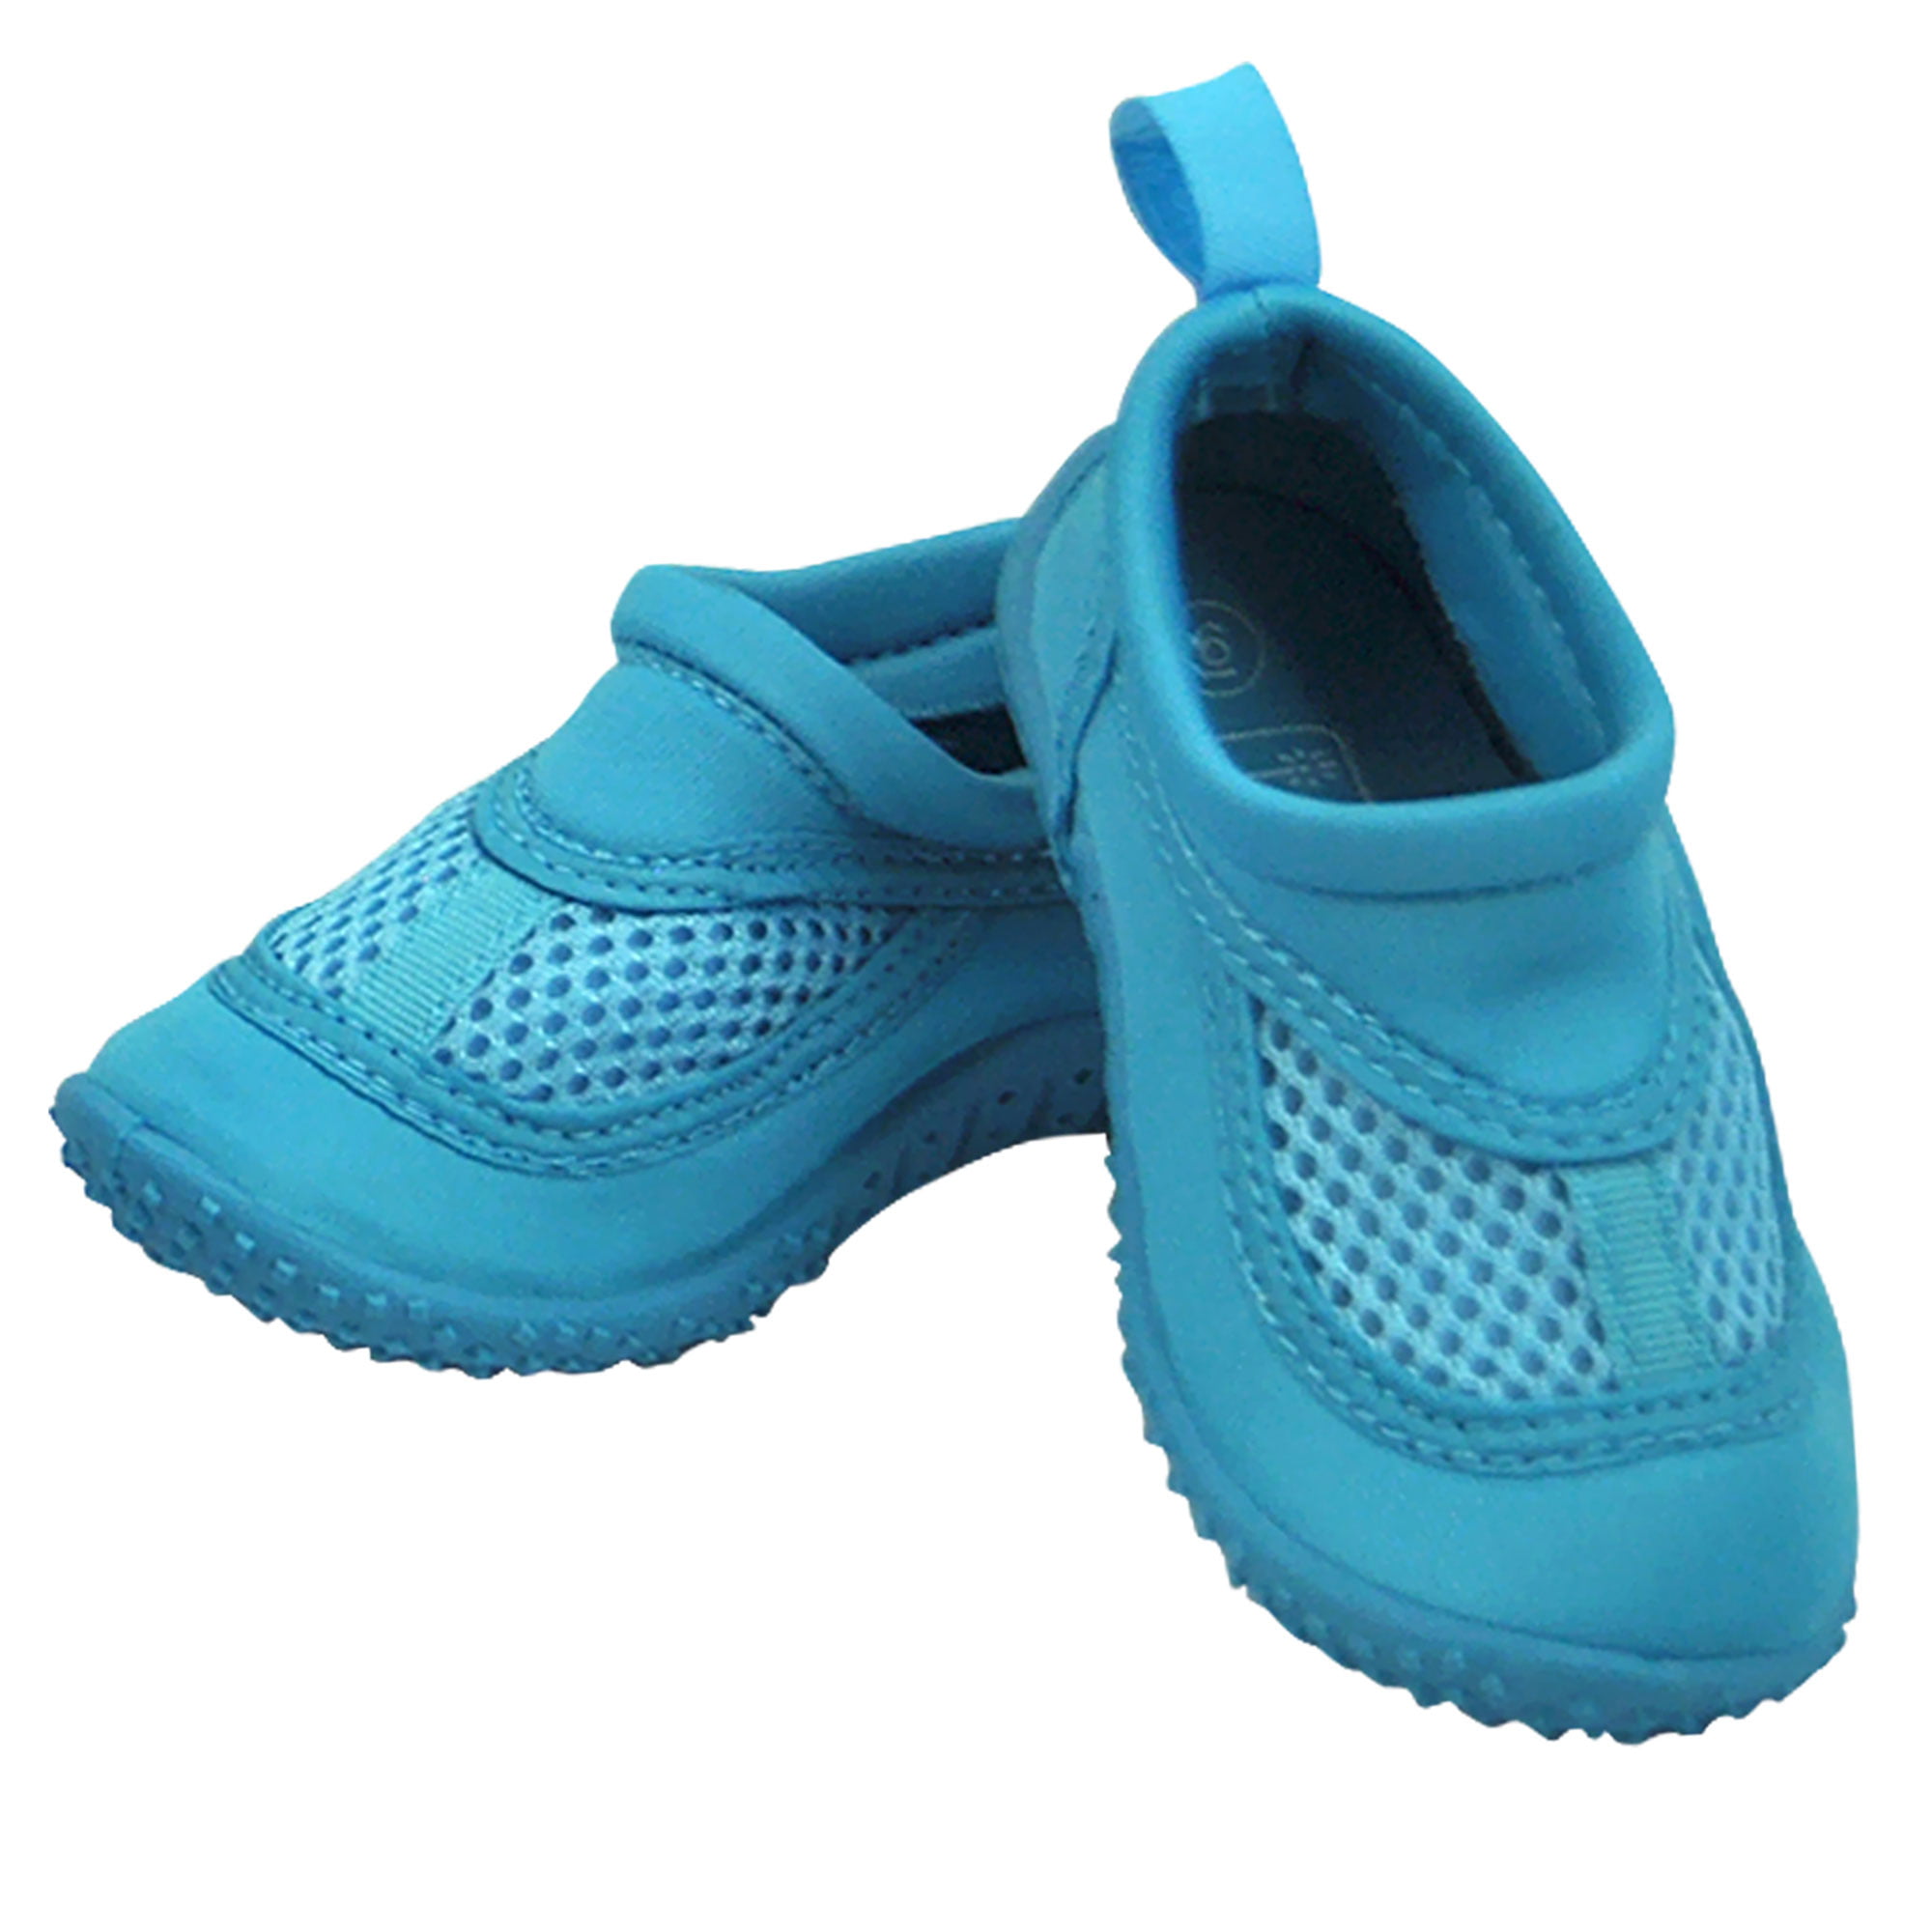 JOINFREE Kids Boys and Girls Swim Water Shoes Toddler Quick Dry Aqua Socks Barefoot Skin Shoes for Beach Sports 